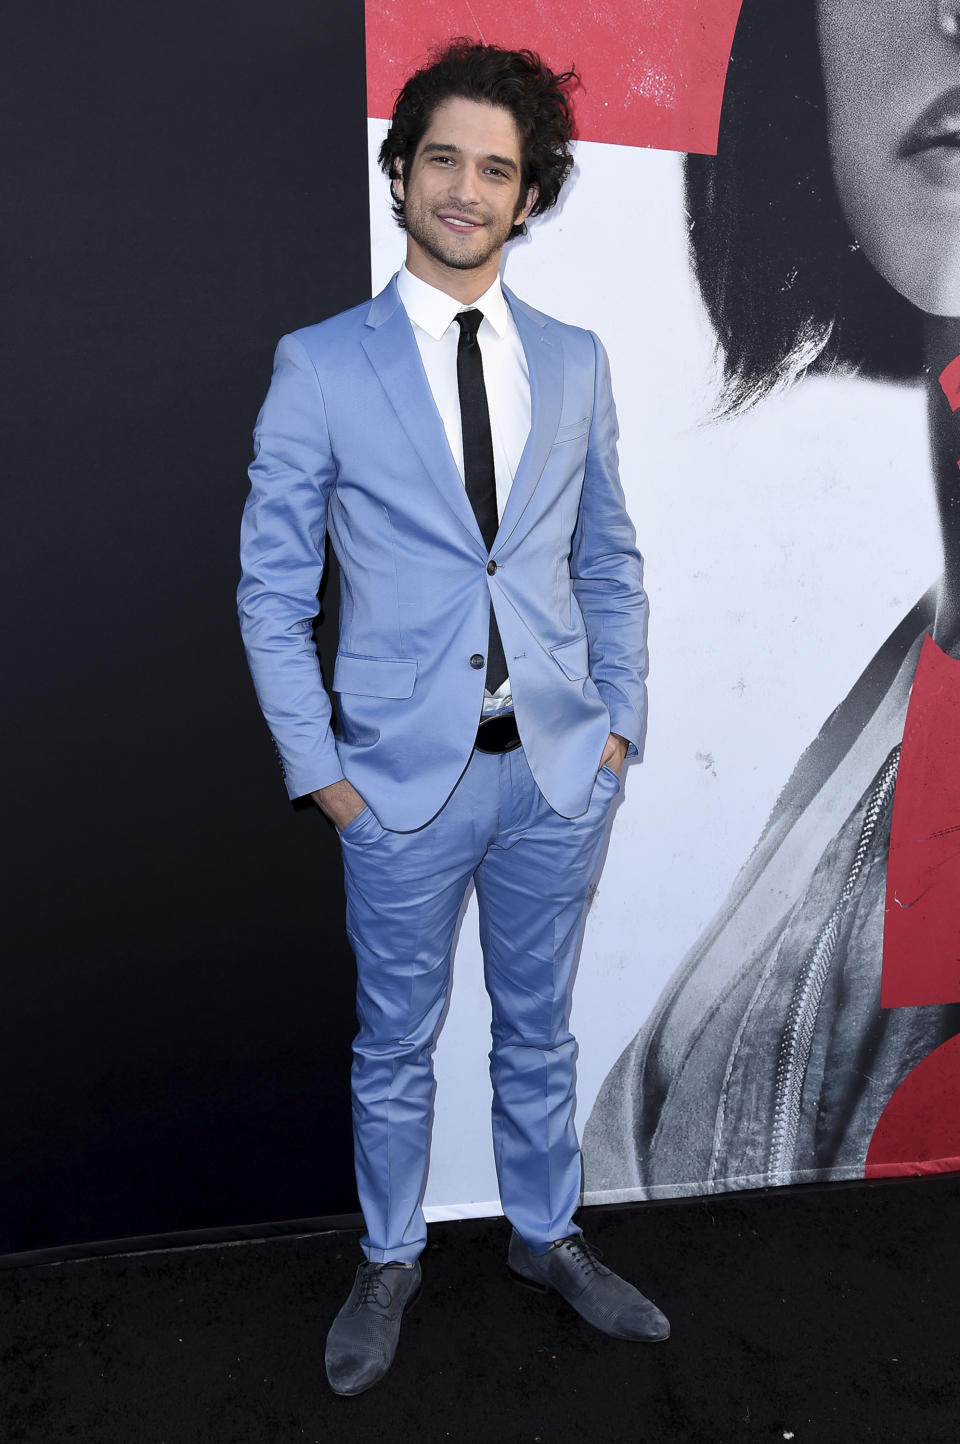 FILE - Tyler Posey attends the premiere of "Truth or Dare" on April 12, 2018, in Los Angeles. Posey turns 30 on Oct. 18. (Photo by Richard Shotwell/Invision/AP, File)